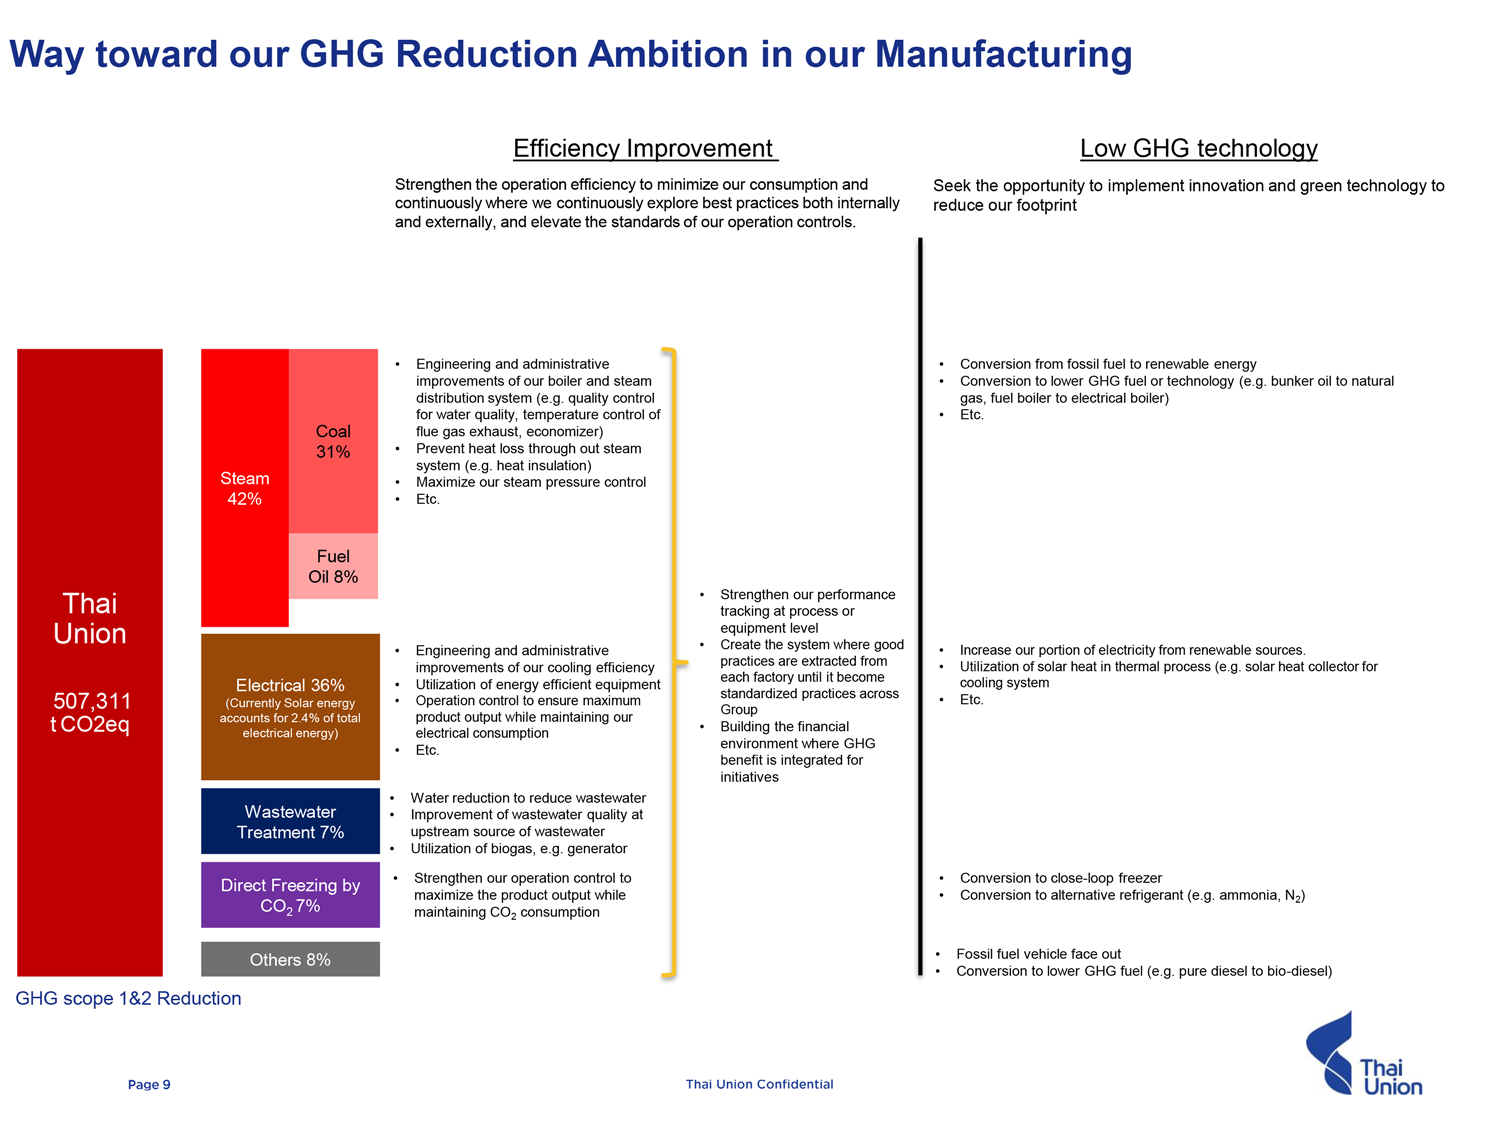 Way toward our GHG Reduction Ambition in our Manufacturing